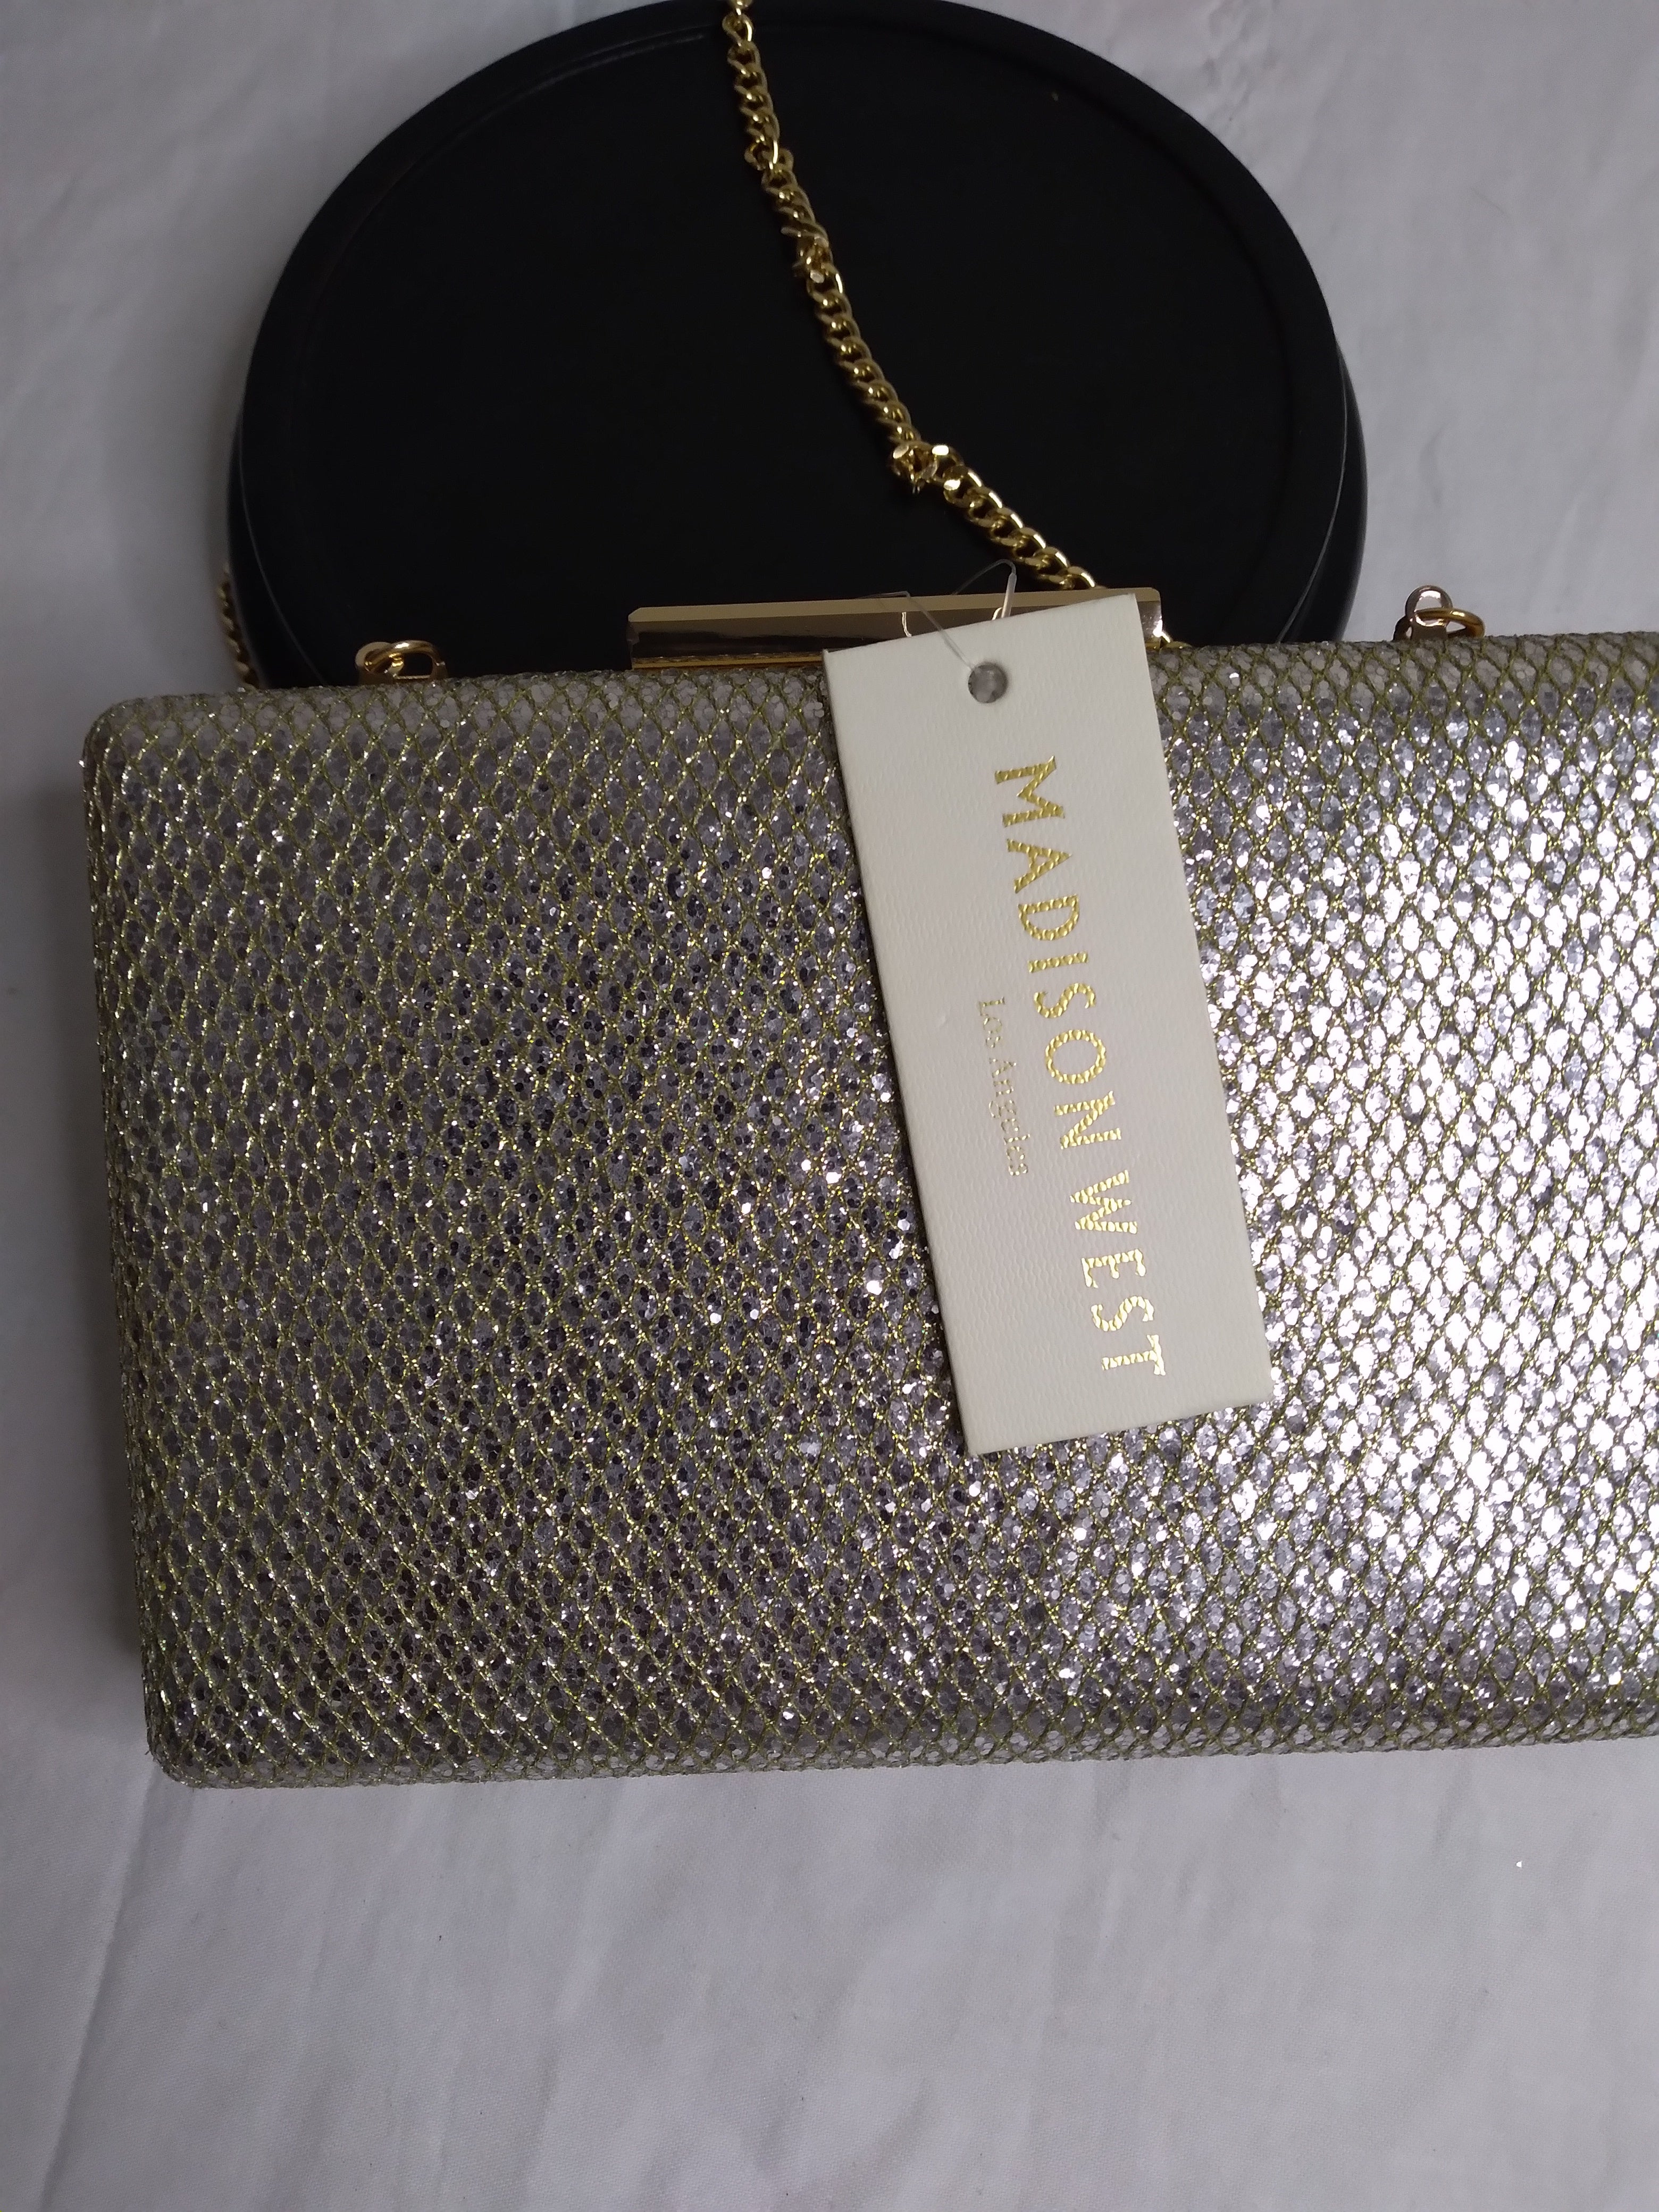 Glitter Bling,Shiny Glamorous,Elegant Silver Glitter Clutch Purse for Women  Evening Bag Sparkly Formal Wedding Bridal Purse Prom Cocktail Party Handbag  With Pleated Dinner Bag For Party Girl,Woman,For Female Perfect for  Party,Wedding,Prom,Dinner ...